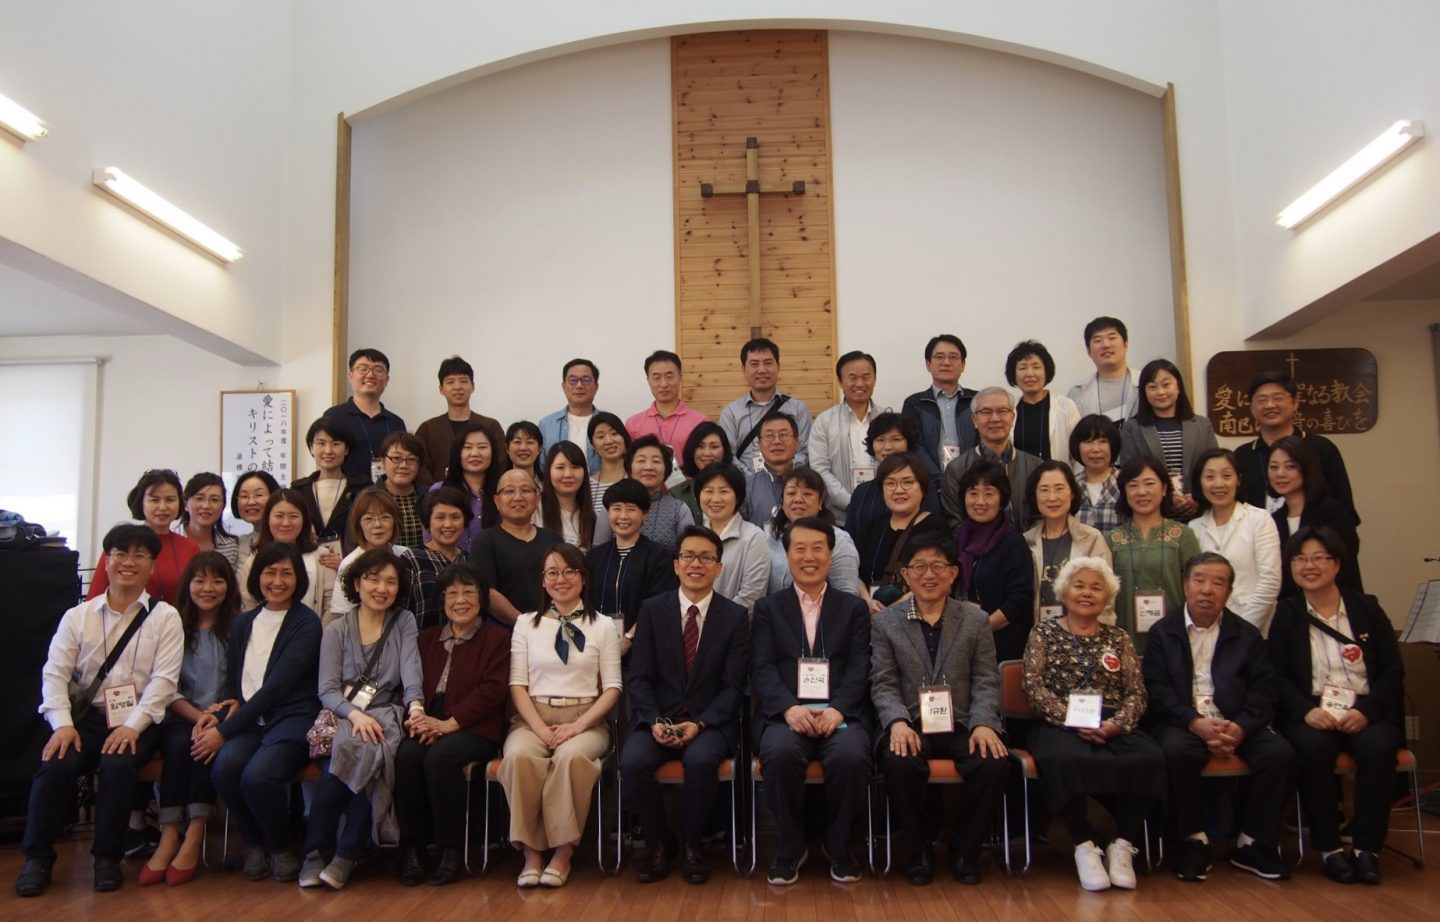 Pastor Tak and Suzuko (middle of the first row) together with their growing congregation at Sapporo Minami Evangelical Christ Church.